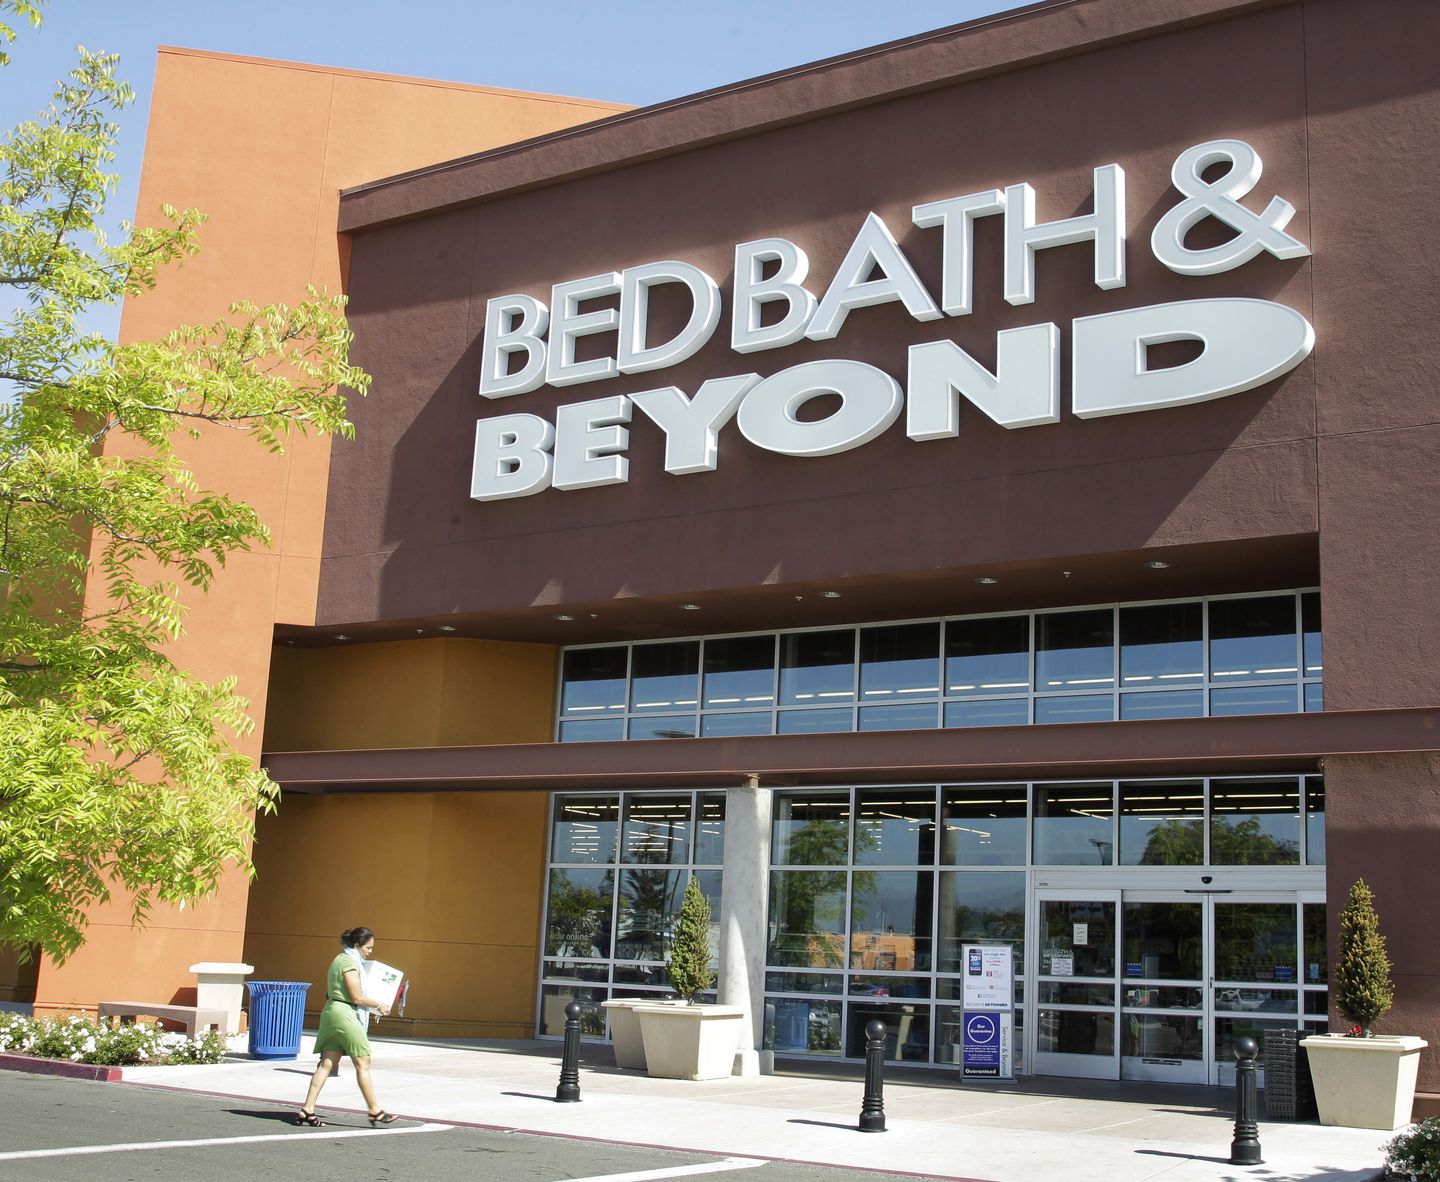 Bed Bath & Beyond is back; Overstock.com adopts name of company it bought in June